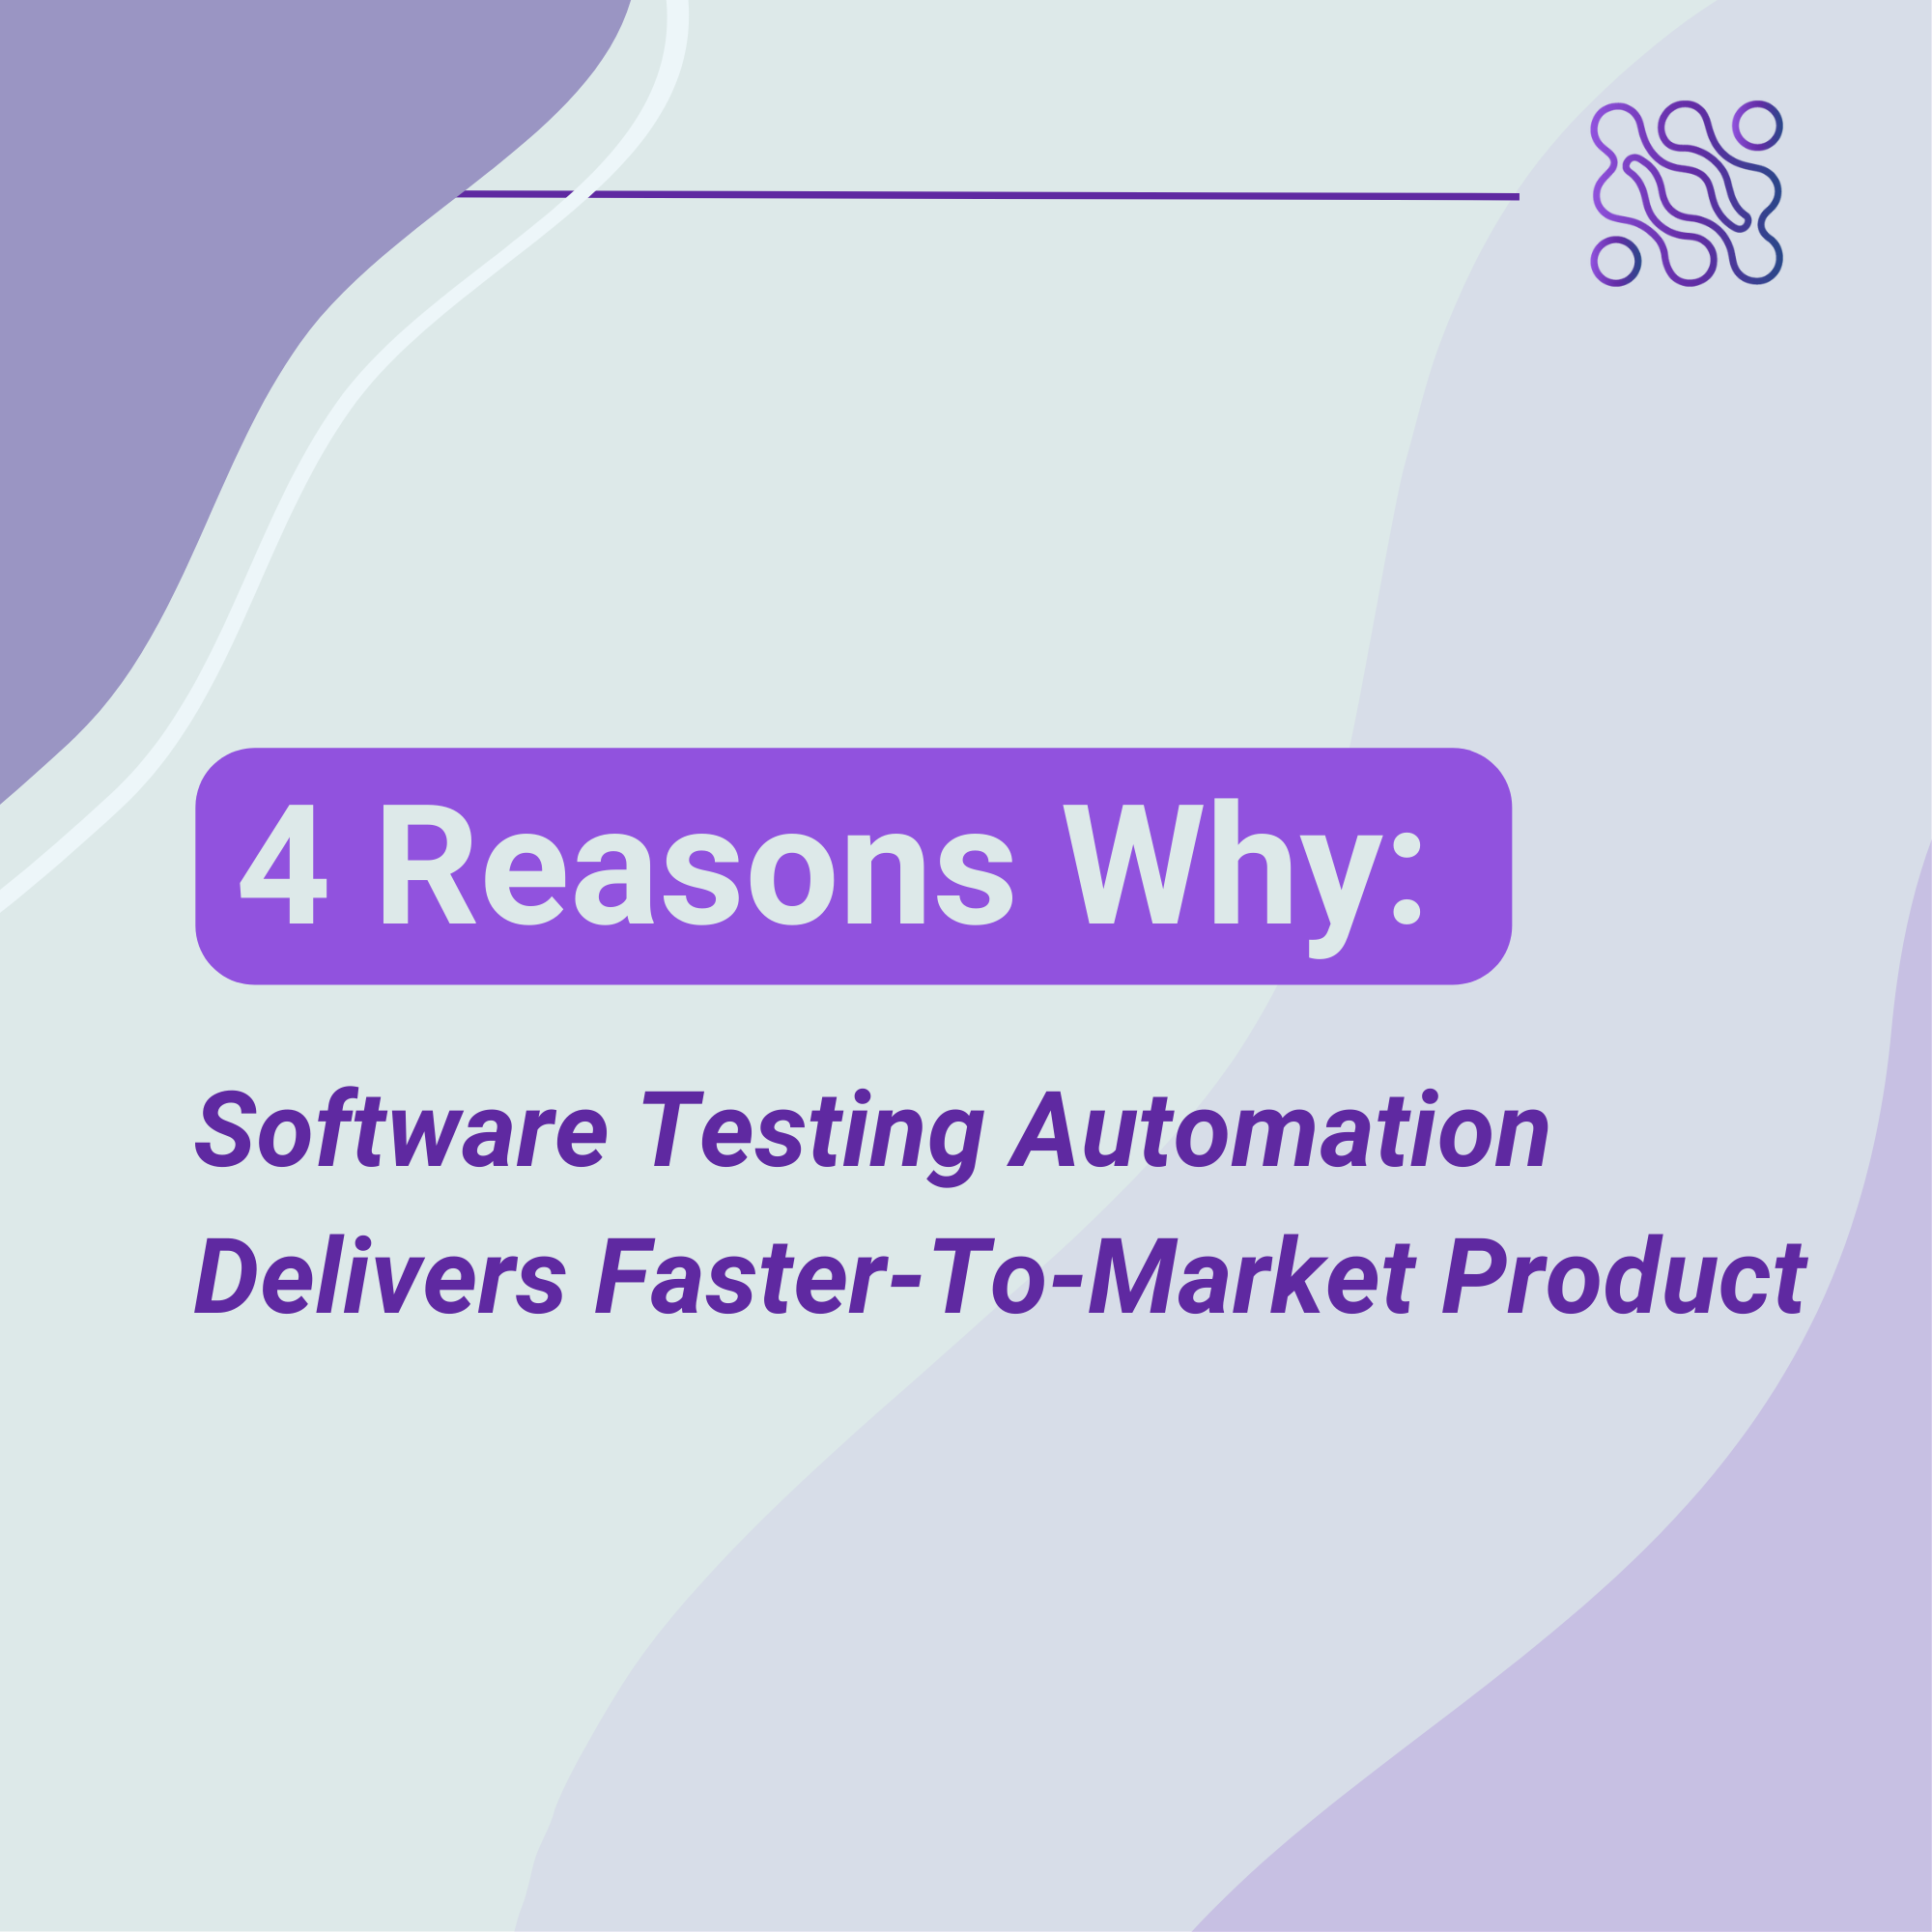 4 Reasons Why Software Testing Automation Delivers Faster-To-Market Products